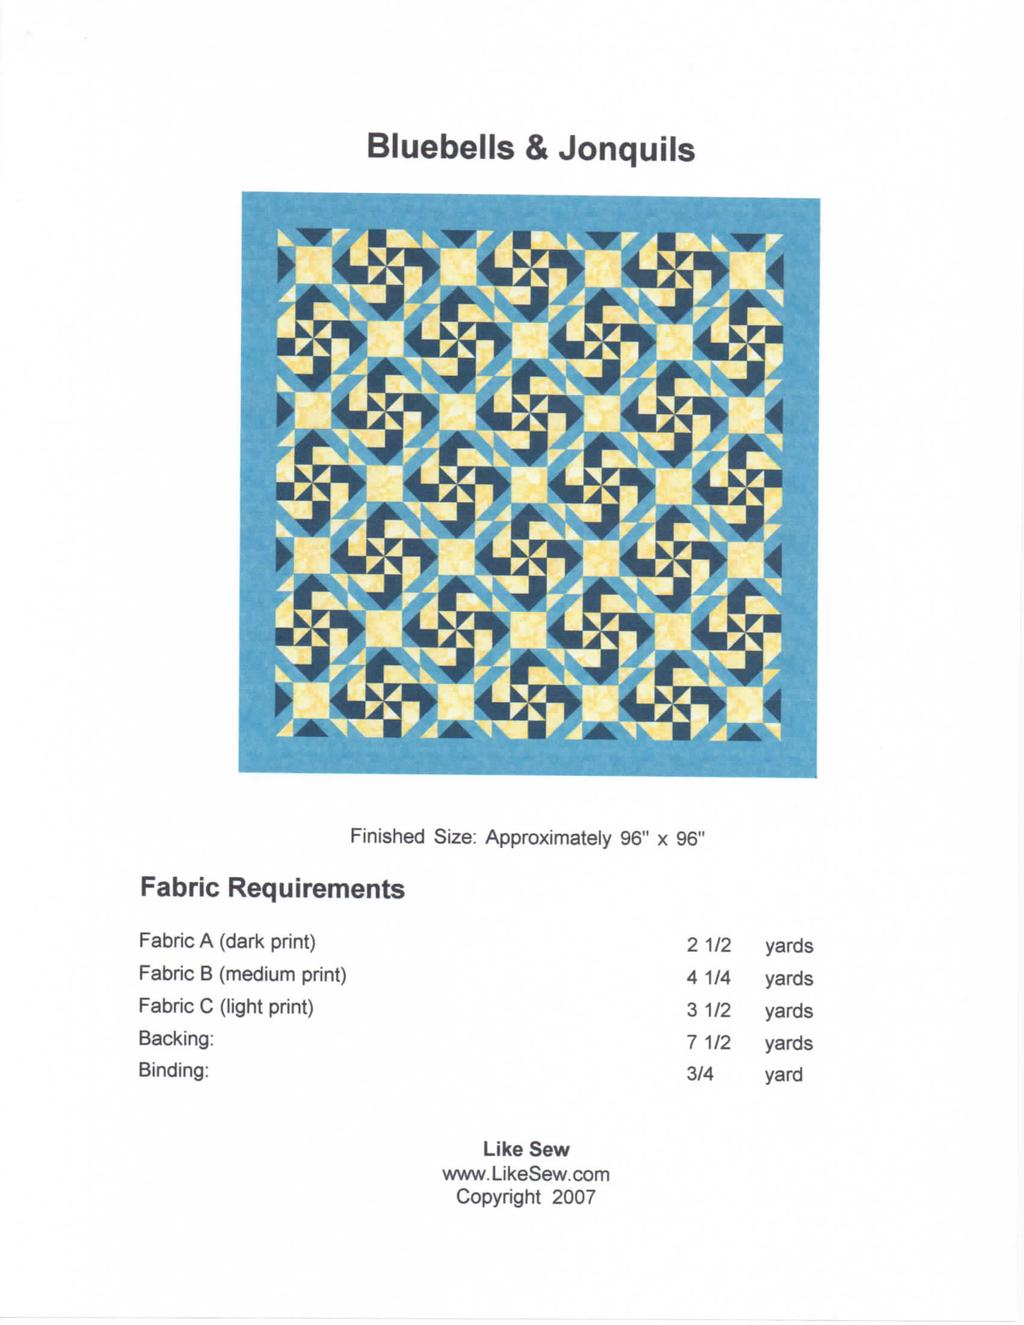 luebells & Jonquils Fabric Requirements Finished Size: Approximately 96" x 96" Fabric A (dark print) Fabric (medium